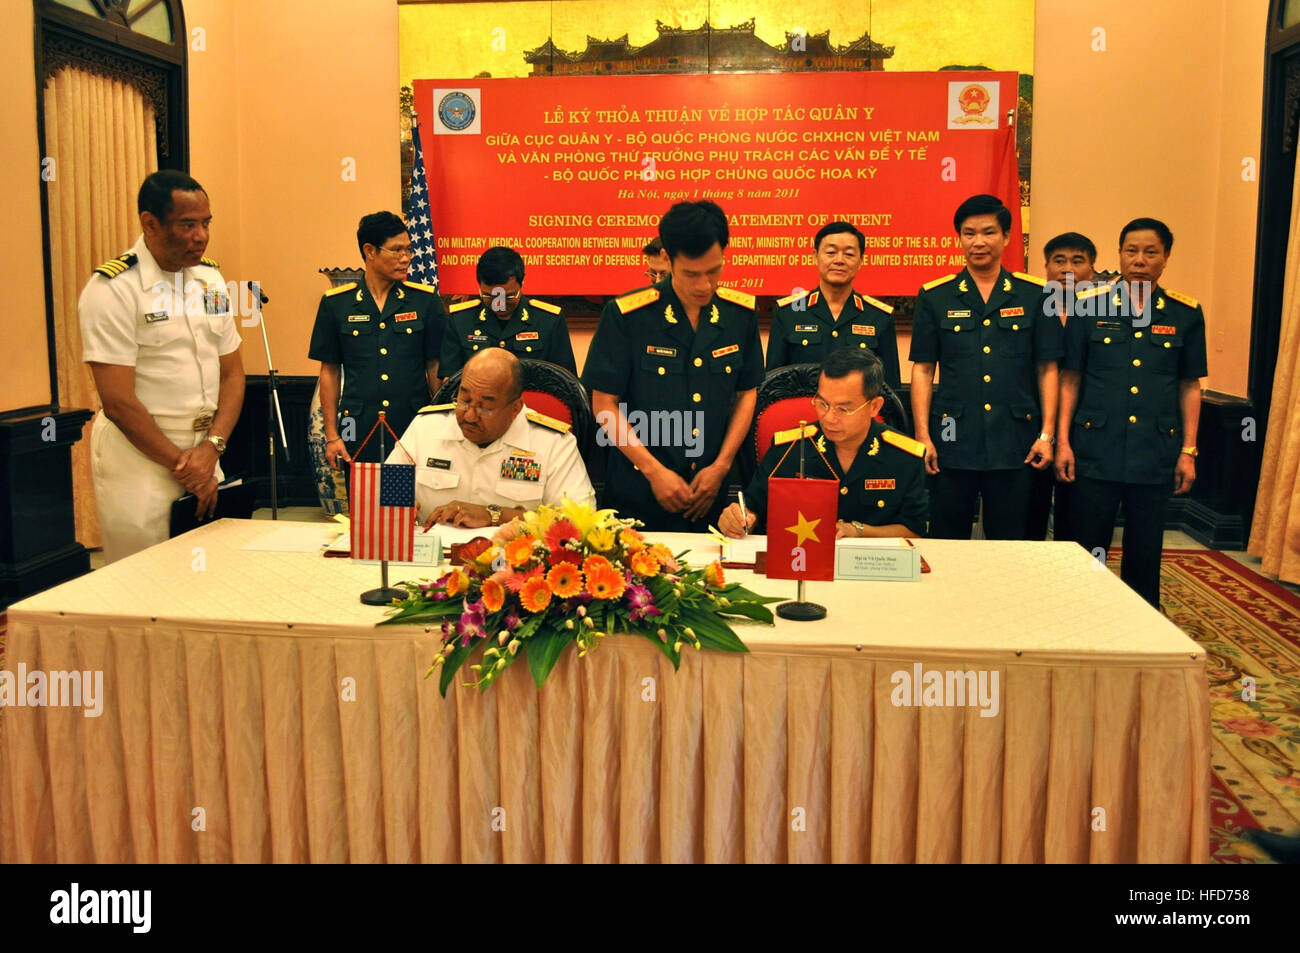 The U.S. Navy Vice Adm. Adam M. Robinson Jr. signs a statement of intent on military medical cooperation with Sr. Col. Vu Quoc Binh, director general of the Vietnamese Ministry of National Defense's Military Medical Department. U.S. Embassy Chargé d'Affaires Claire Pierangelo and Deputy Minister of National Defense Lt. Gen. Le Huu Duc witnessed the signing. The signing ceremony represents continued progress on a key area of military cooperation outlined by former Secretary of Defense Robert Gates and Minister of Defense Phung Quang Thanh in October 2010.  (Photo by: Capt. Cappy Surette) Statem Stock Photo